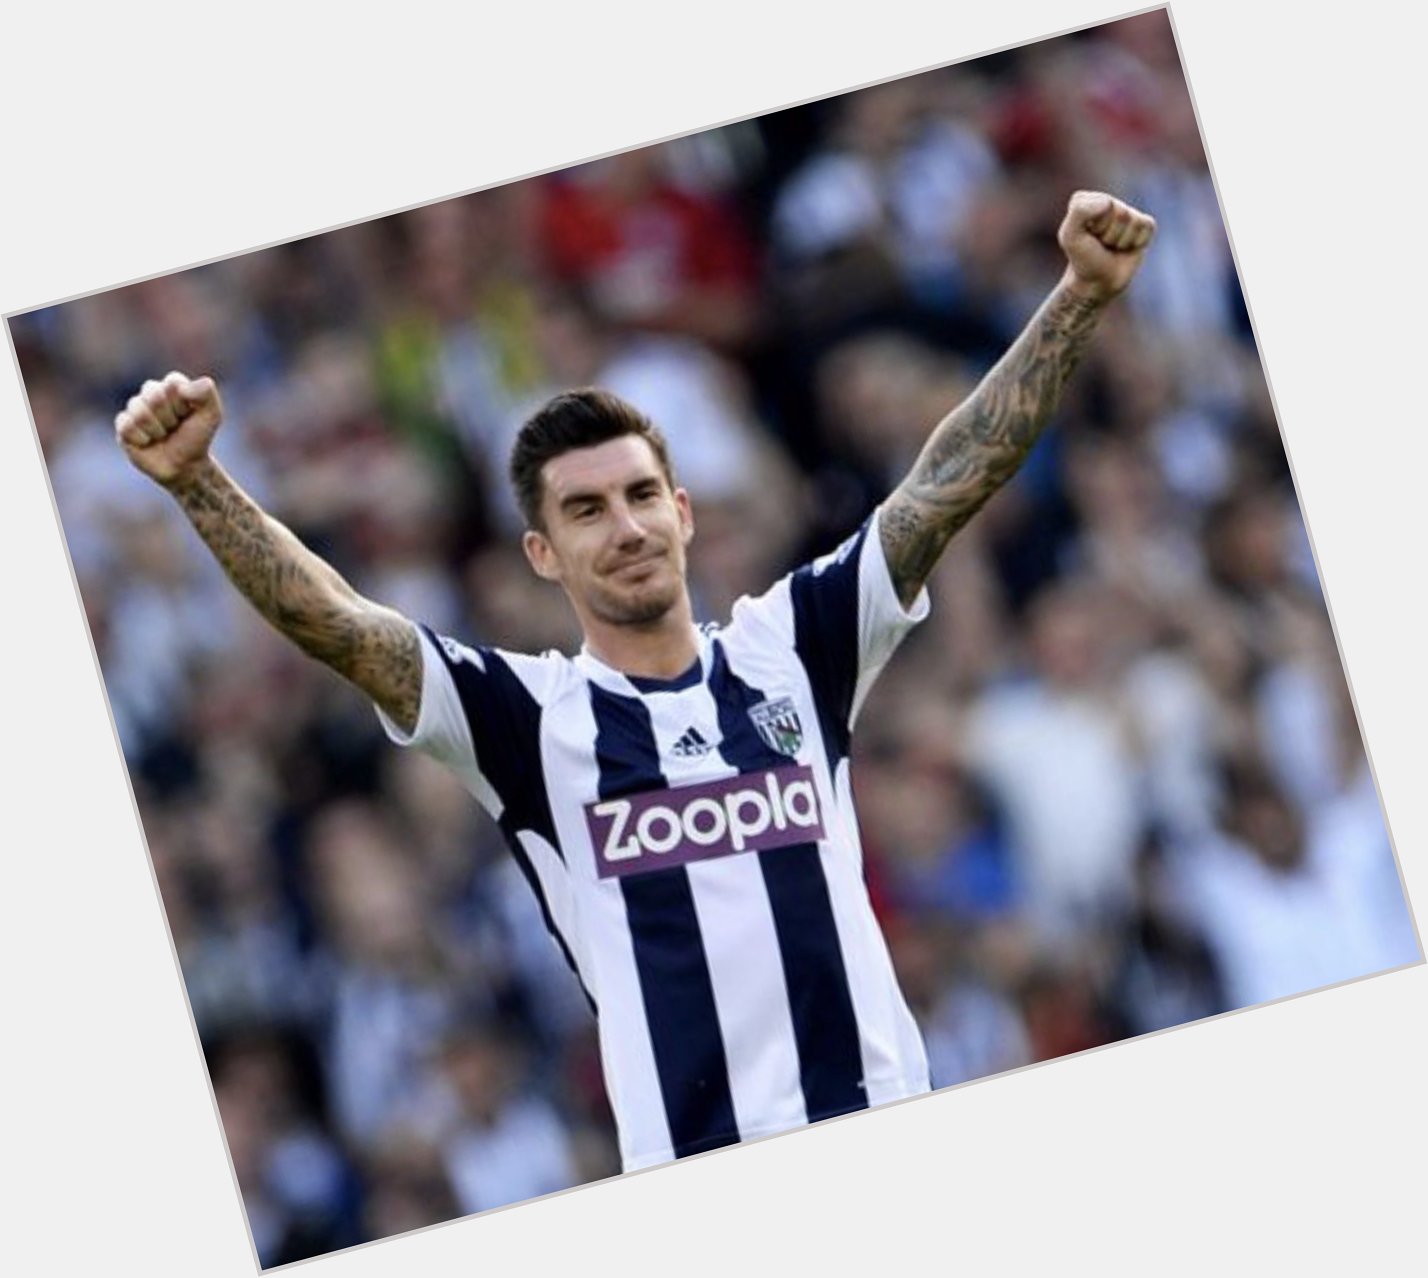 Happy Birthday Liam Ridgewell who is 37 today, 21st July 2021 